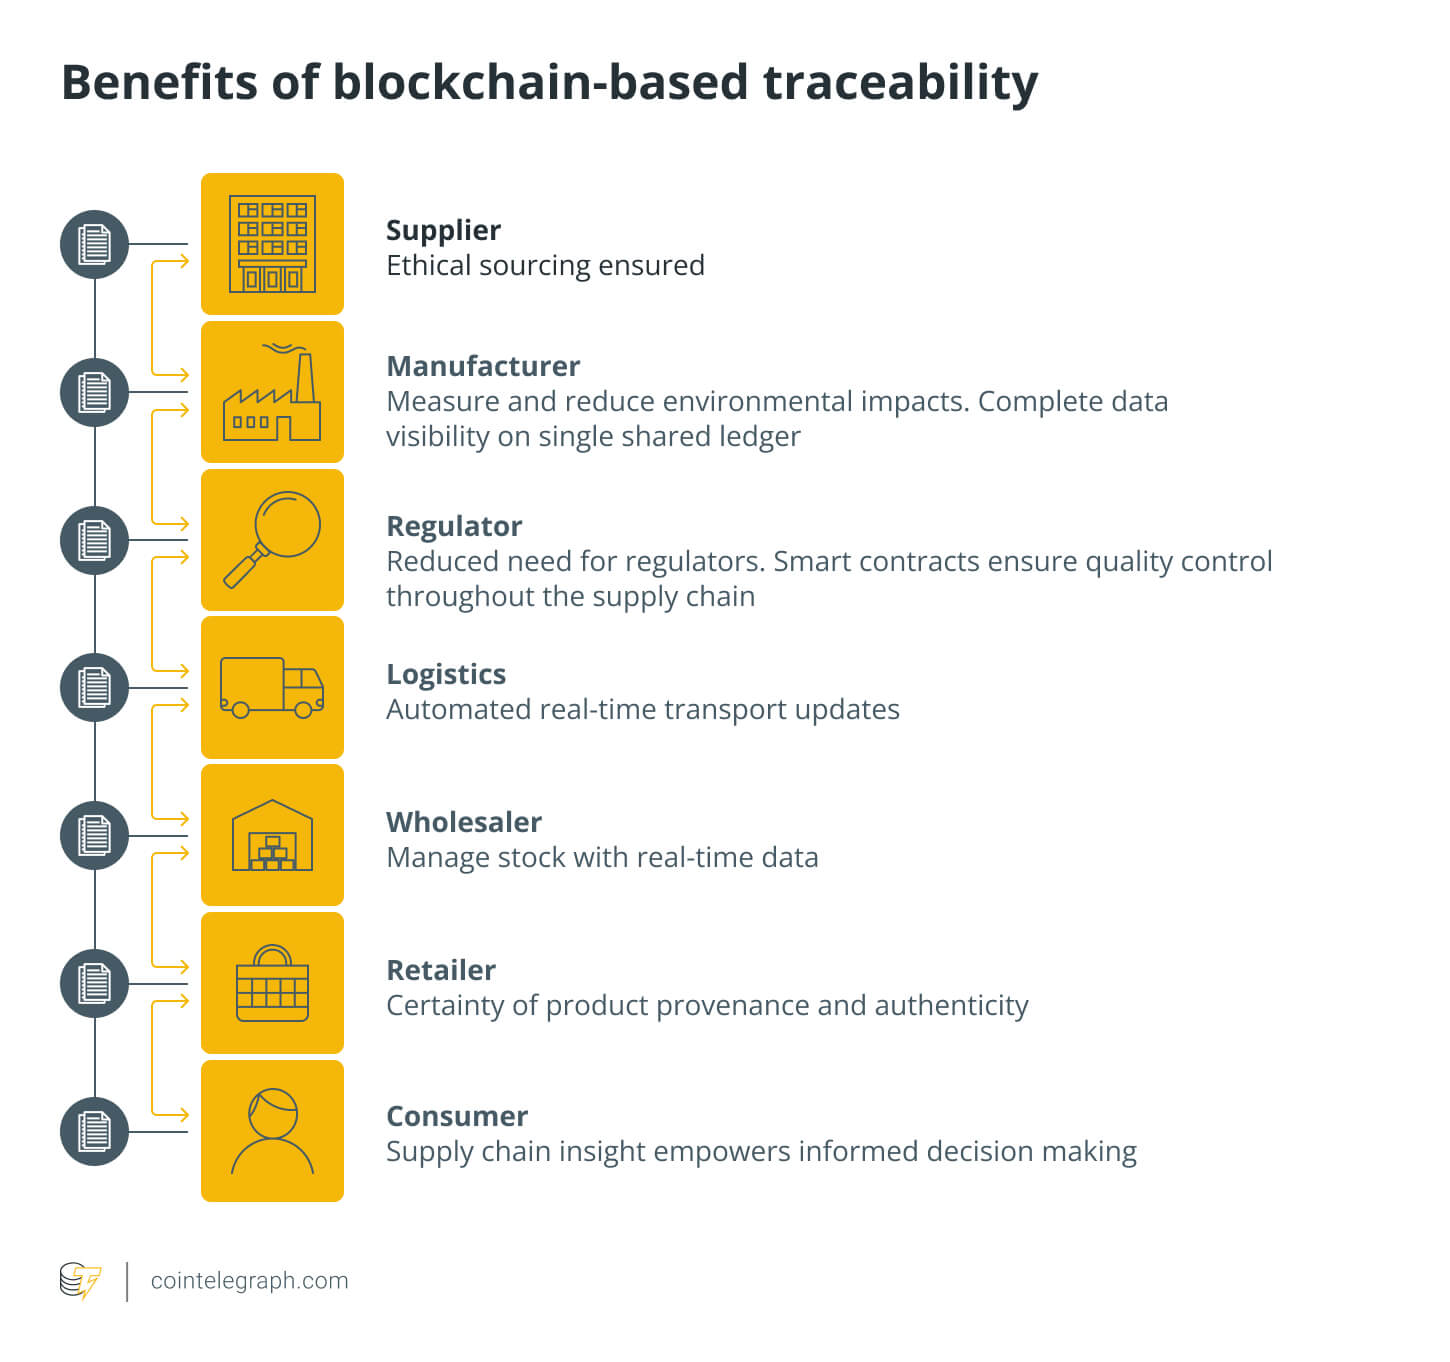 Benefits of blockchain-based technology in supply chain